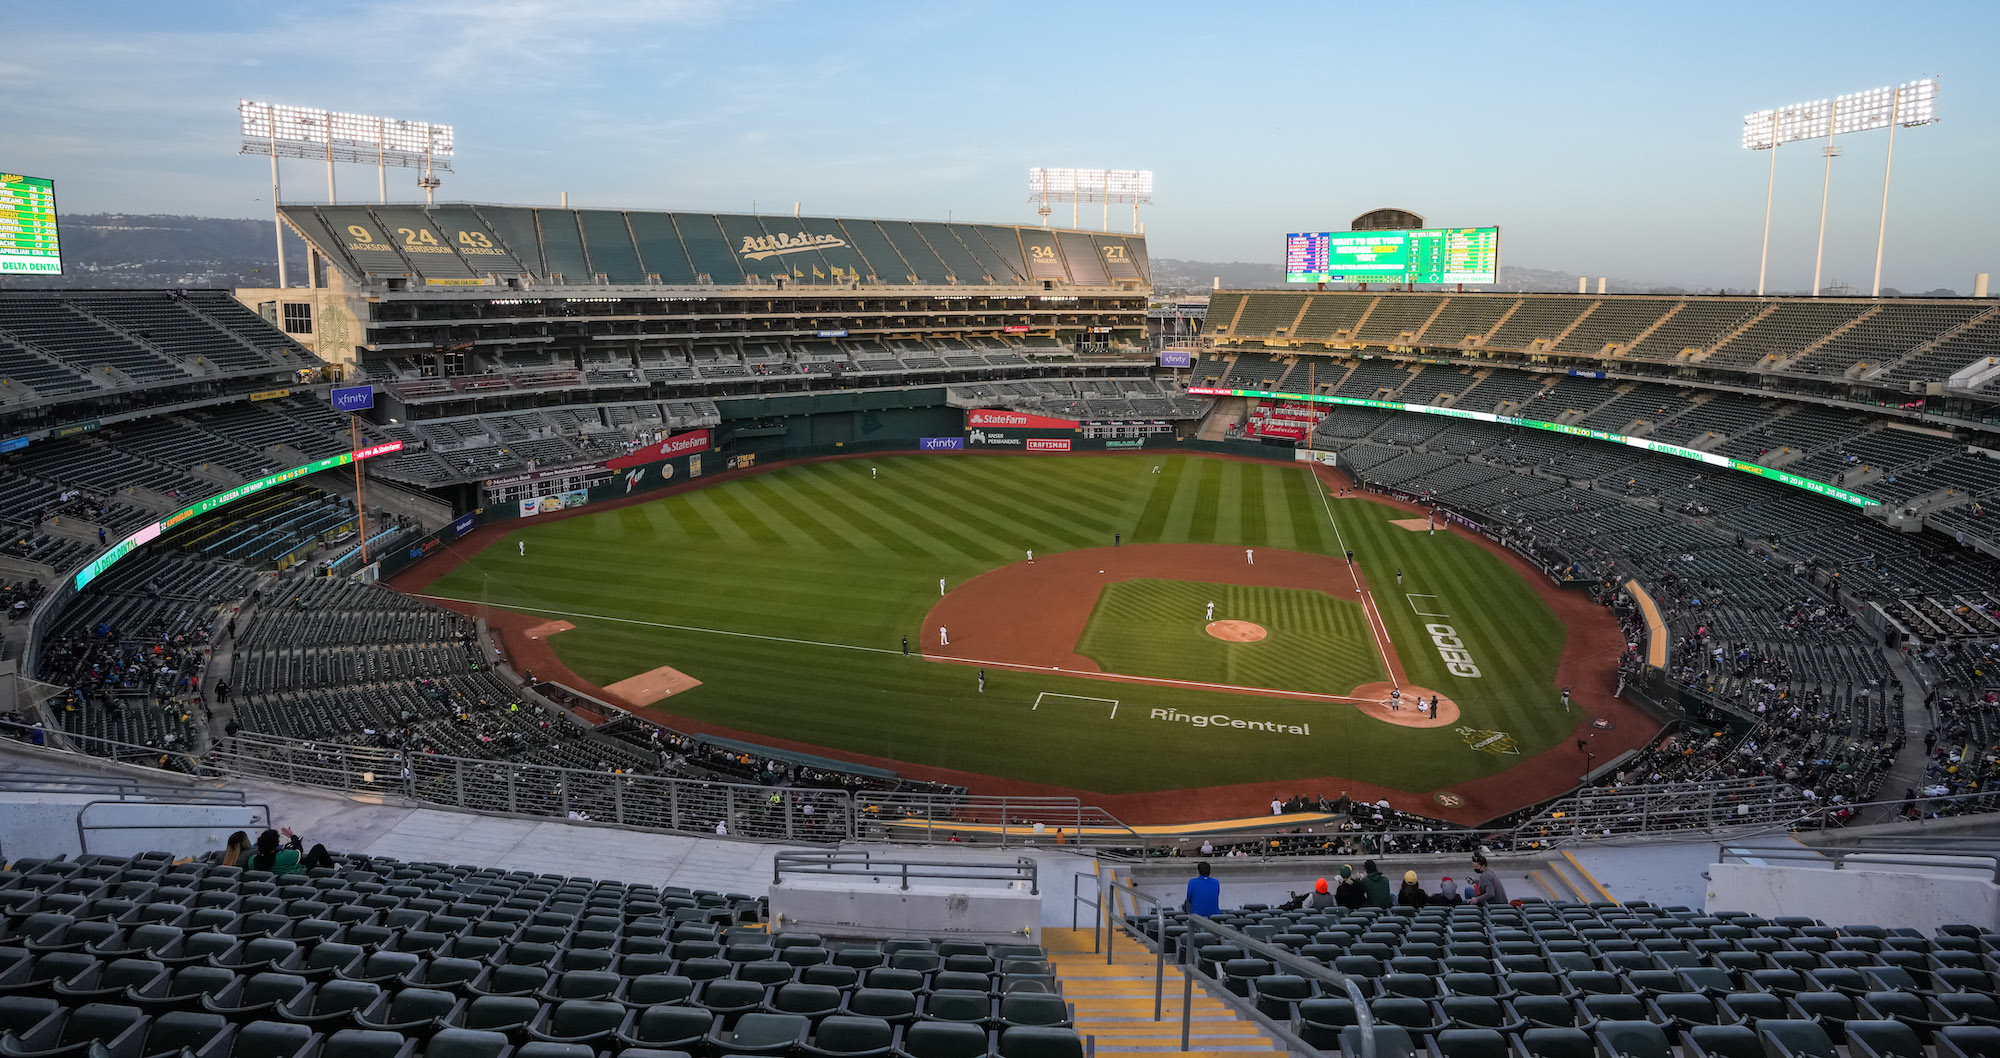 OAKLAND, CALIFORNIA - MAY 17: A general view during a game between the Minnesota Twins and Oakland Athletics on May 17, 2022 at RingCentral Coliseum in Oakland, California. (Photo by Brace Hemmelgarn/Minnesota Twins/Getty Images) *** Local Caption ***